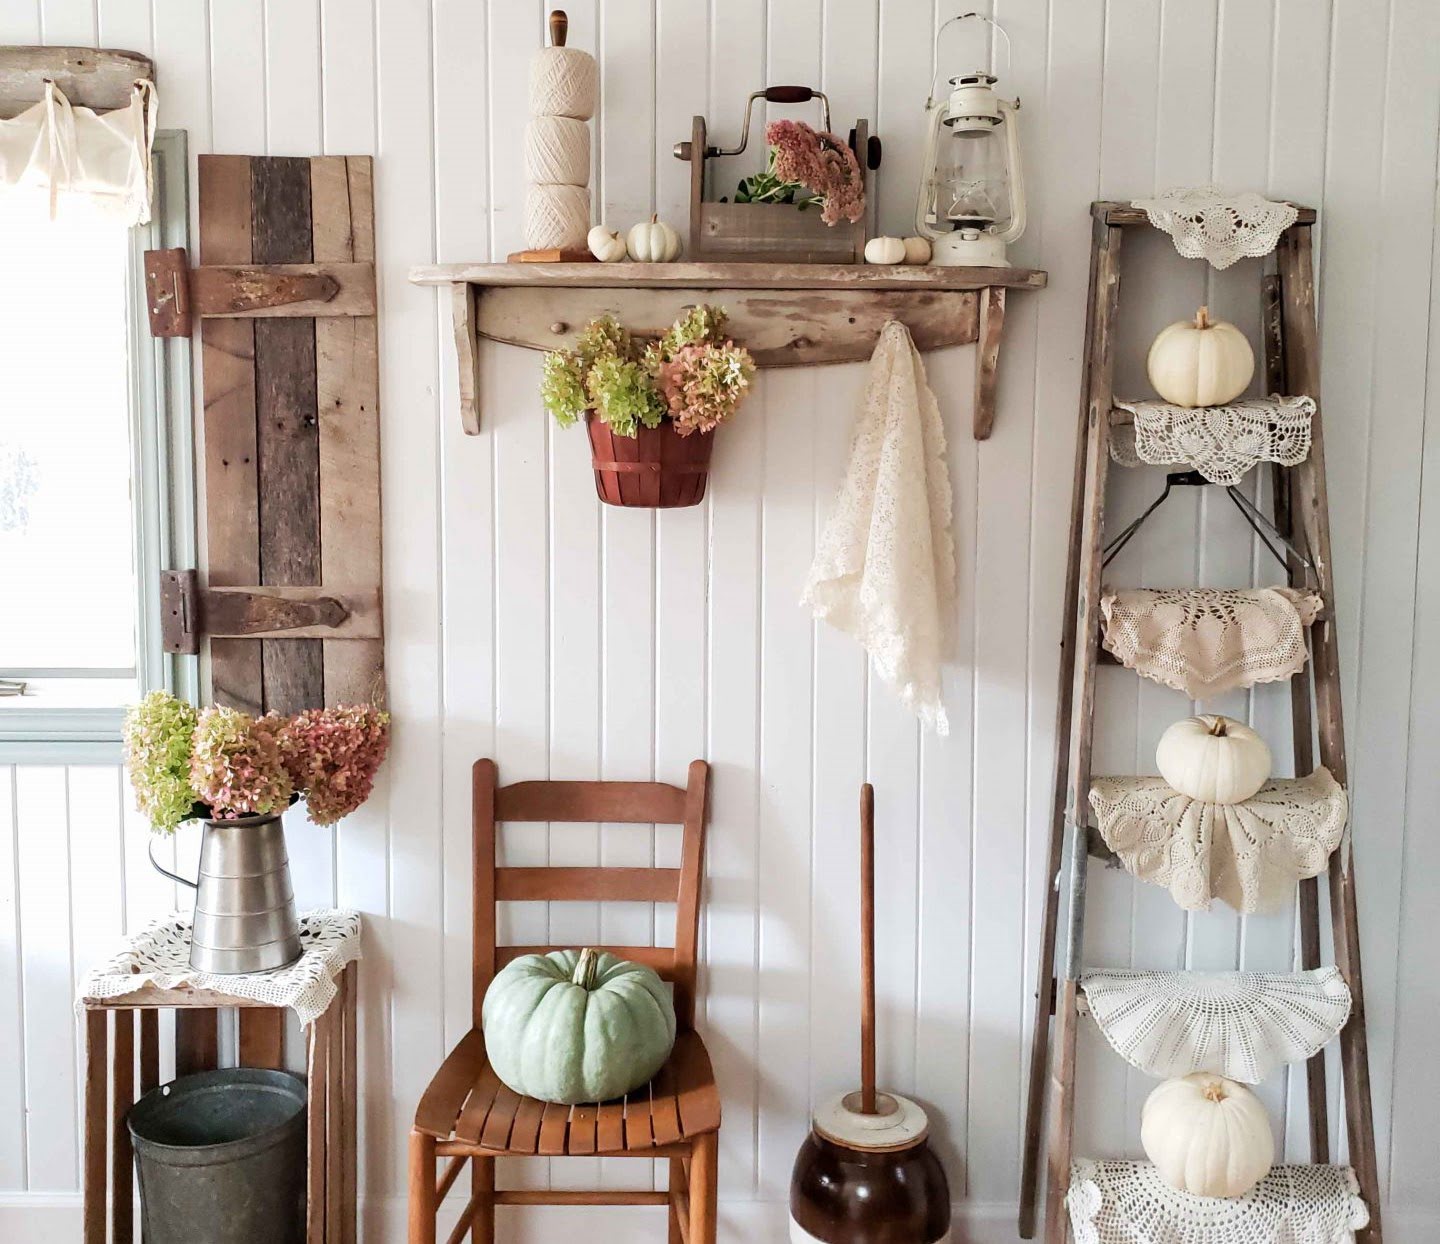 Styling A Shelf: 10 Expert Tips For A Pretty Vignette